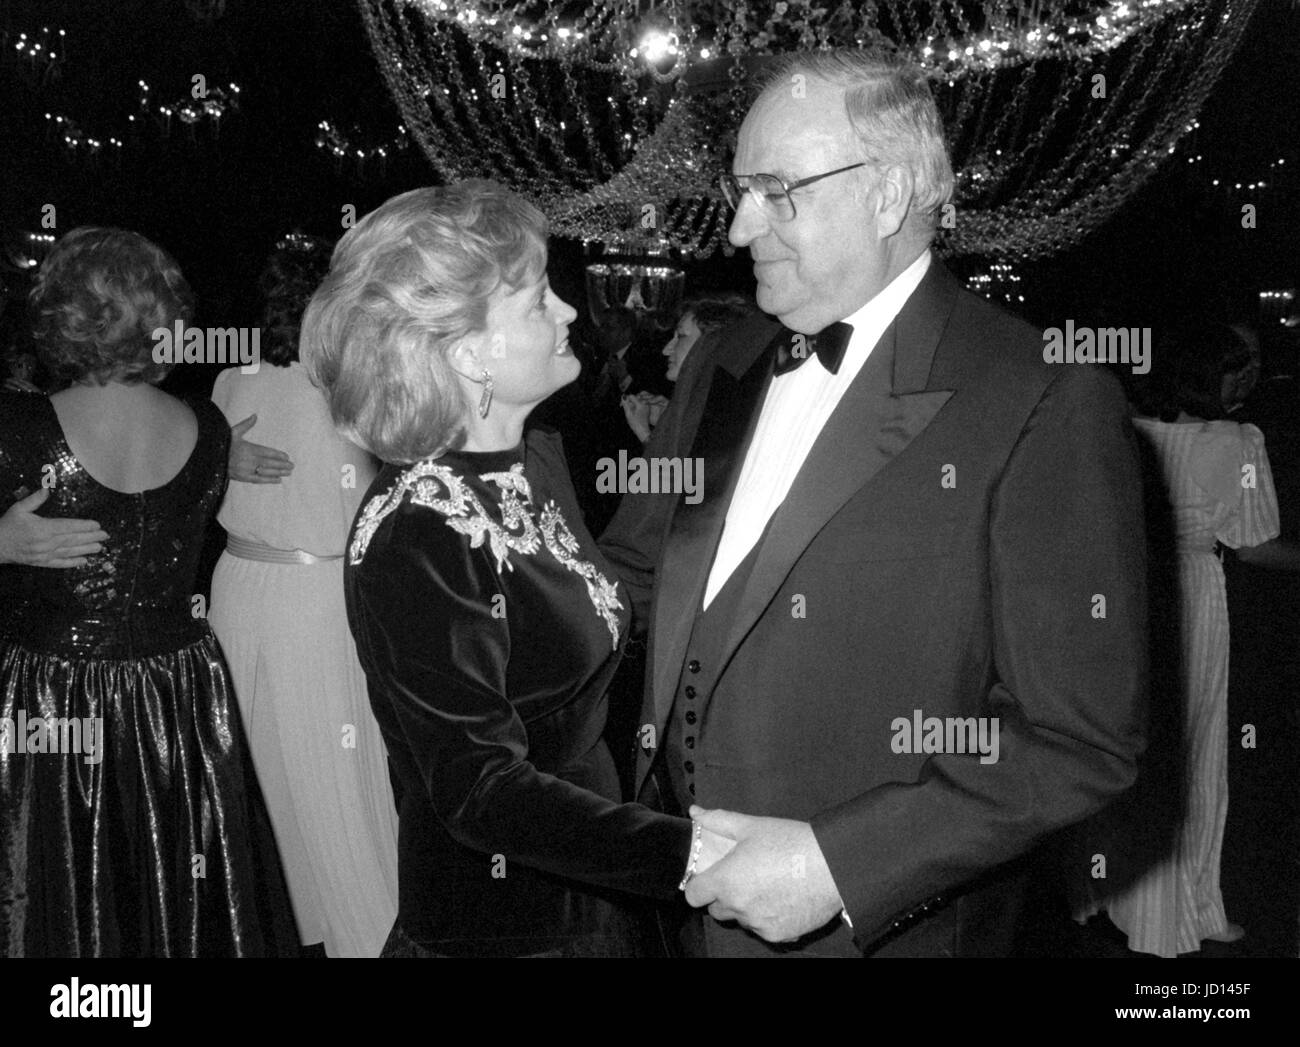 ARCHIVE - German chancellor Helmut Kohl (CDU) and his wife Hannelore Kohl at the Berlin Press Ball in Berlin, 11 January 1987. The former German chancellor Helmut Kohl has died at the age of 87. The news was shared with the German Press Agency by Kohl's lawyer Holthoff-Pfoertner. Photo: Chris Hoffmann Stock Photo